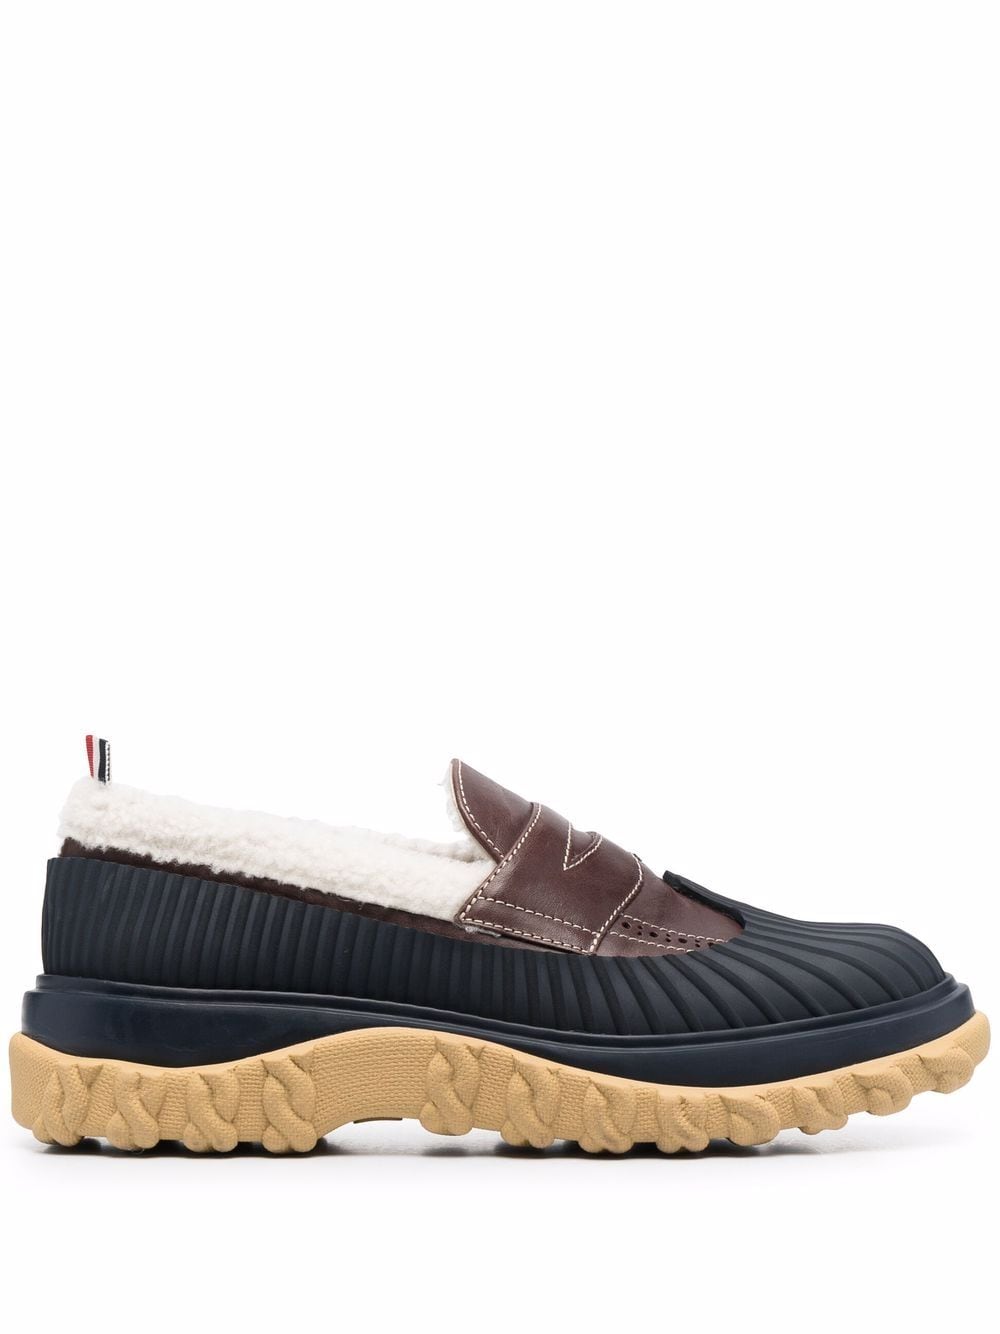 Thom Browne shearling-trim loafer duck shoes von Thom Browne